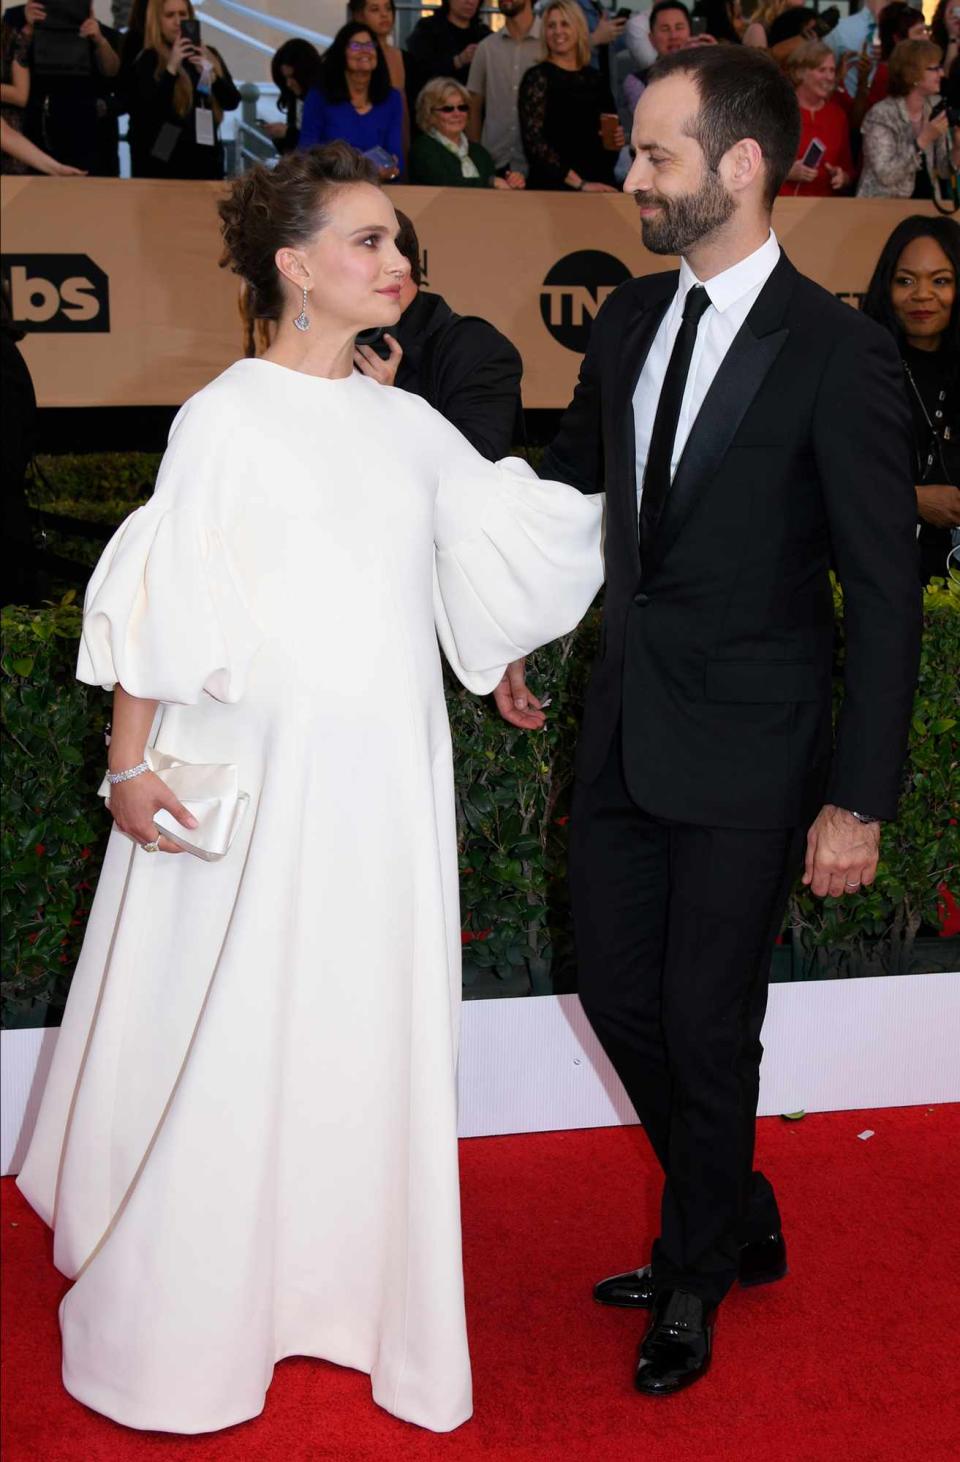 Benjamin Millepied and Natalie Portman on the red carpet at 23rd Annual Screen Actors Guild Awards at The Shrine Expo Hall in Los Angeles on Sunday, January 29, 2017